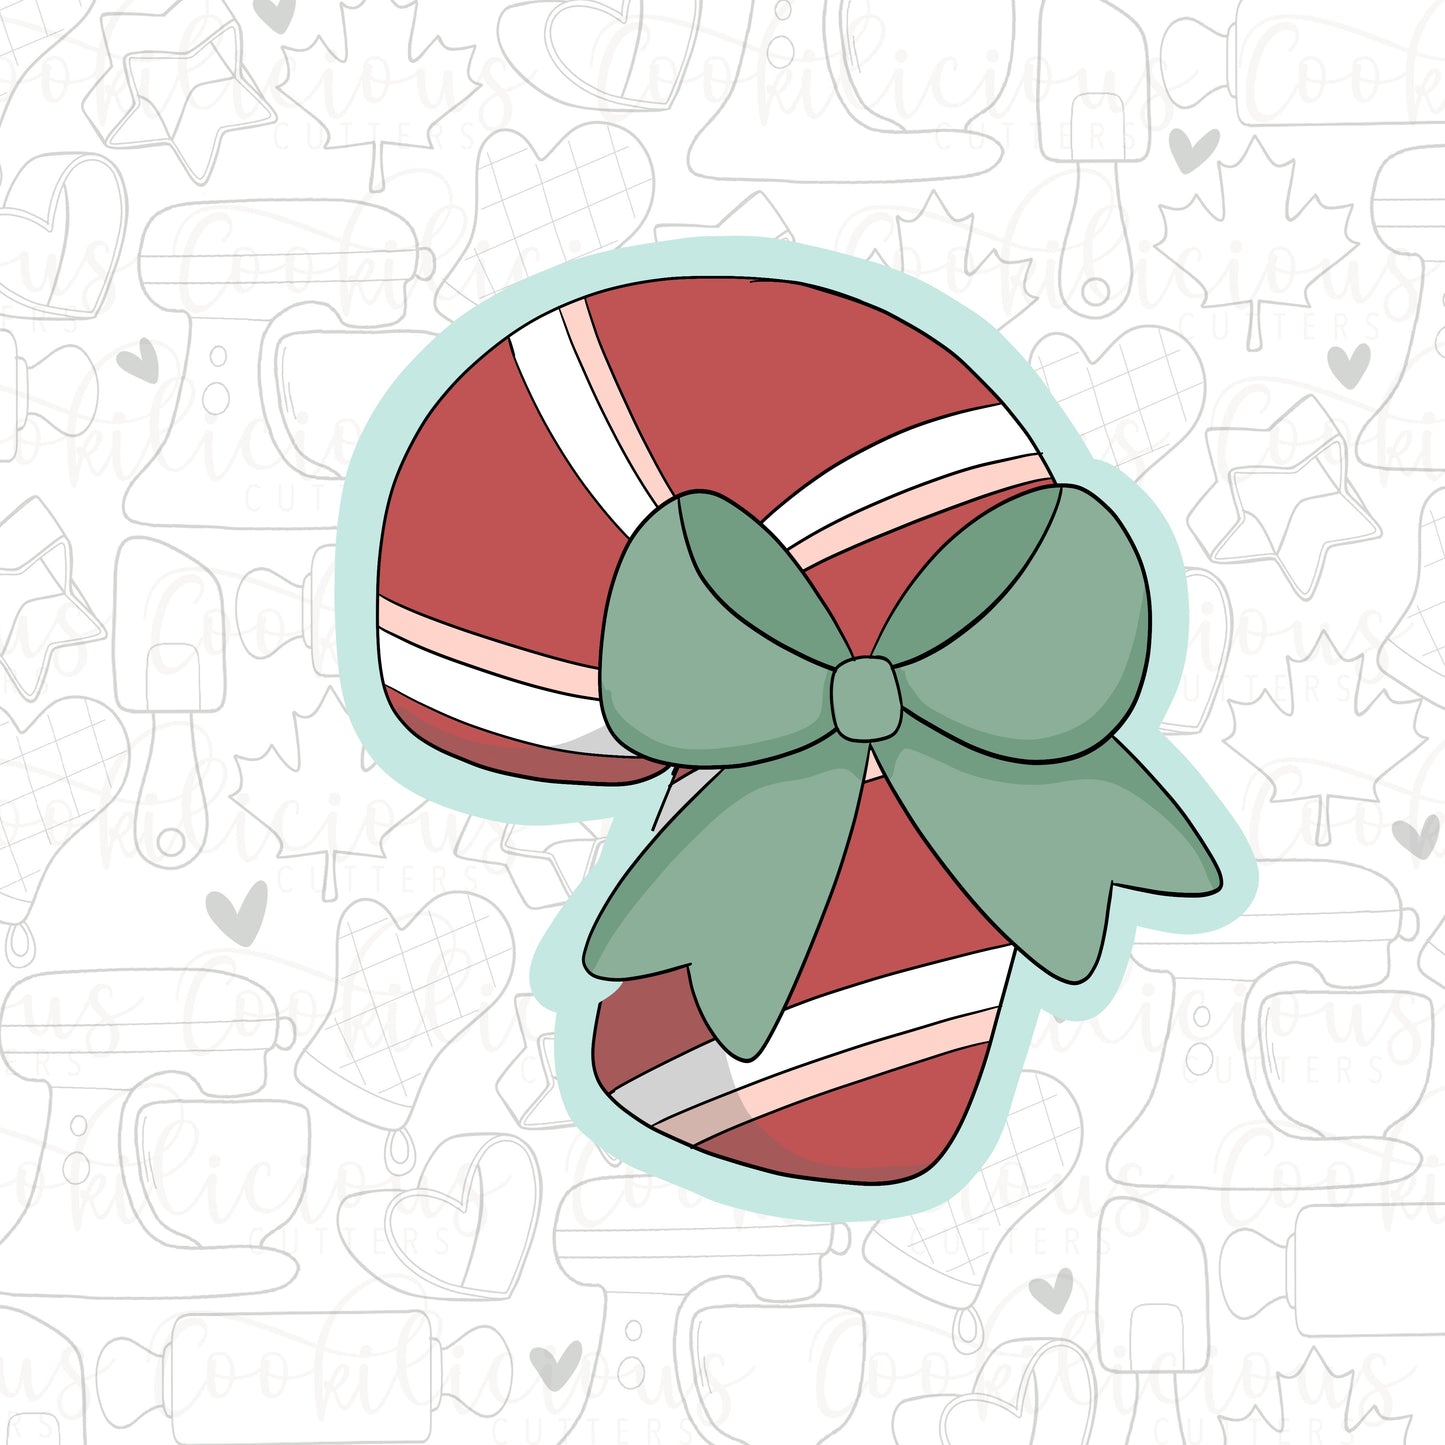 Candy Cane with Bow